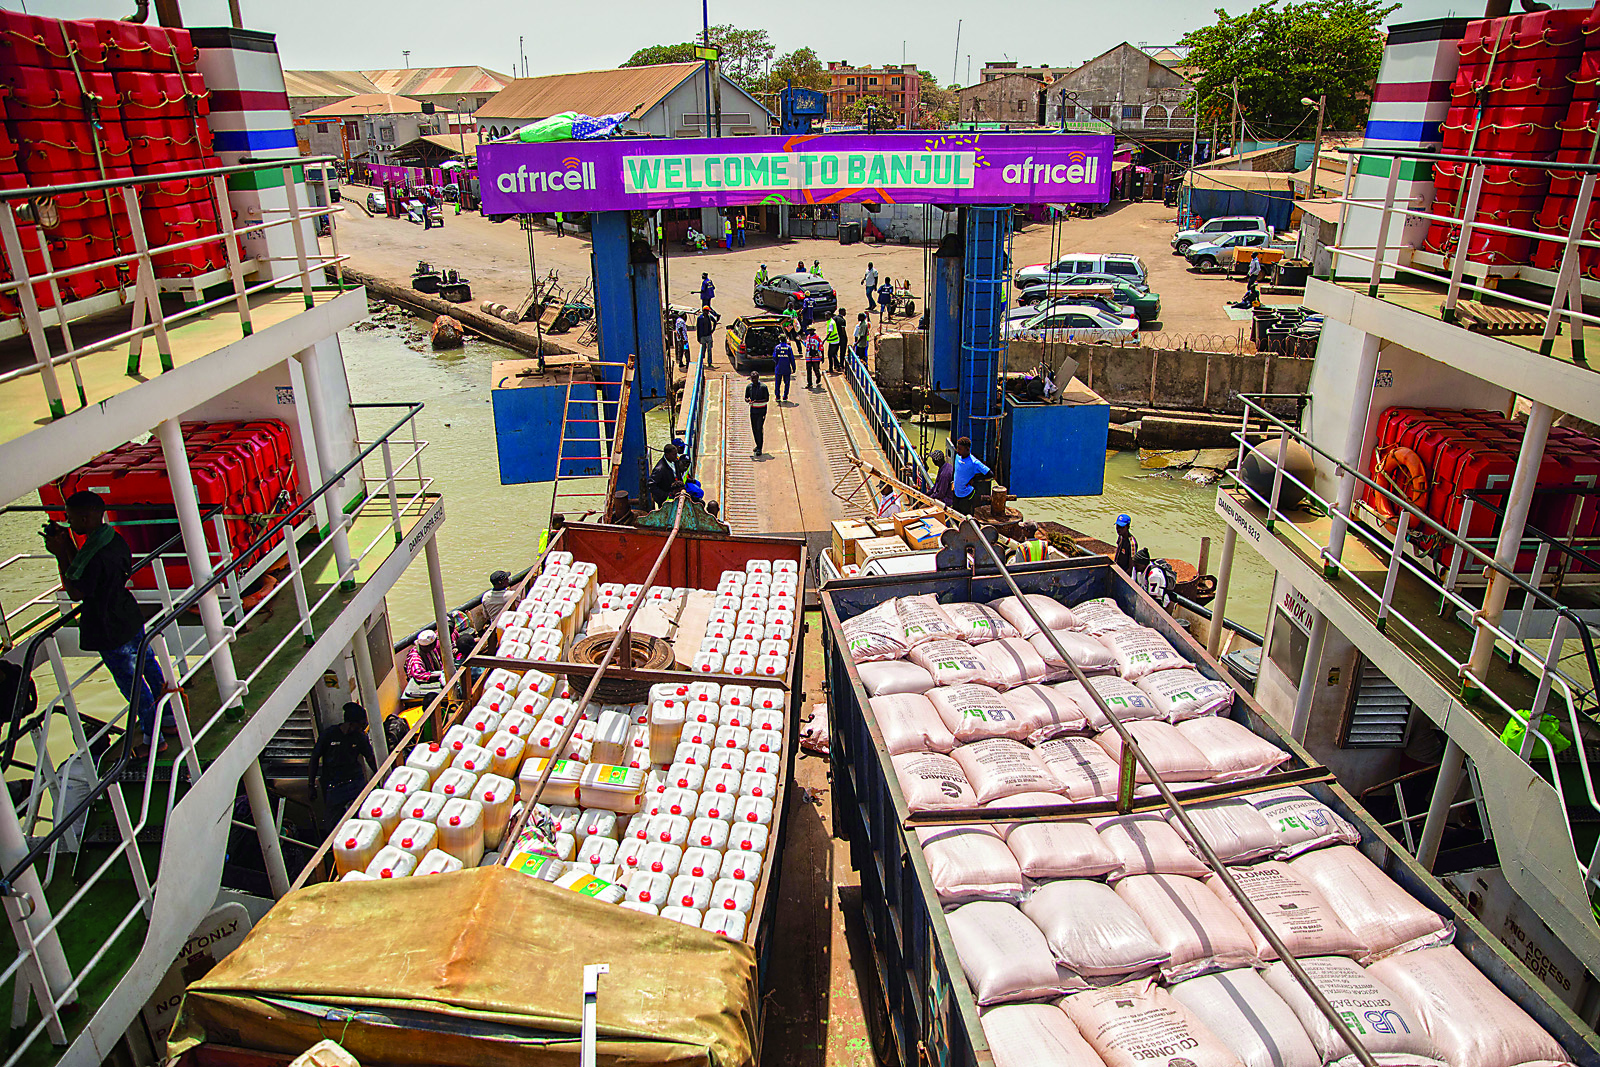 Trucks loaded with agricultural products fill the deck of the ferry that connects Banjul with Barra across the River Gambia. The river runs the length of Gambia and roughly divides it. 